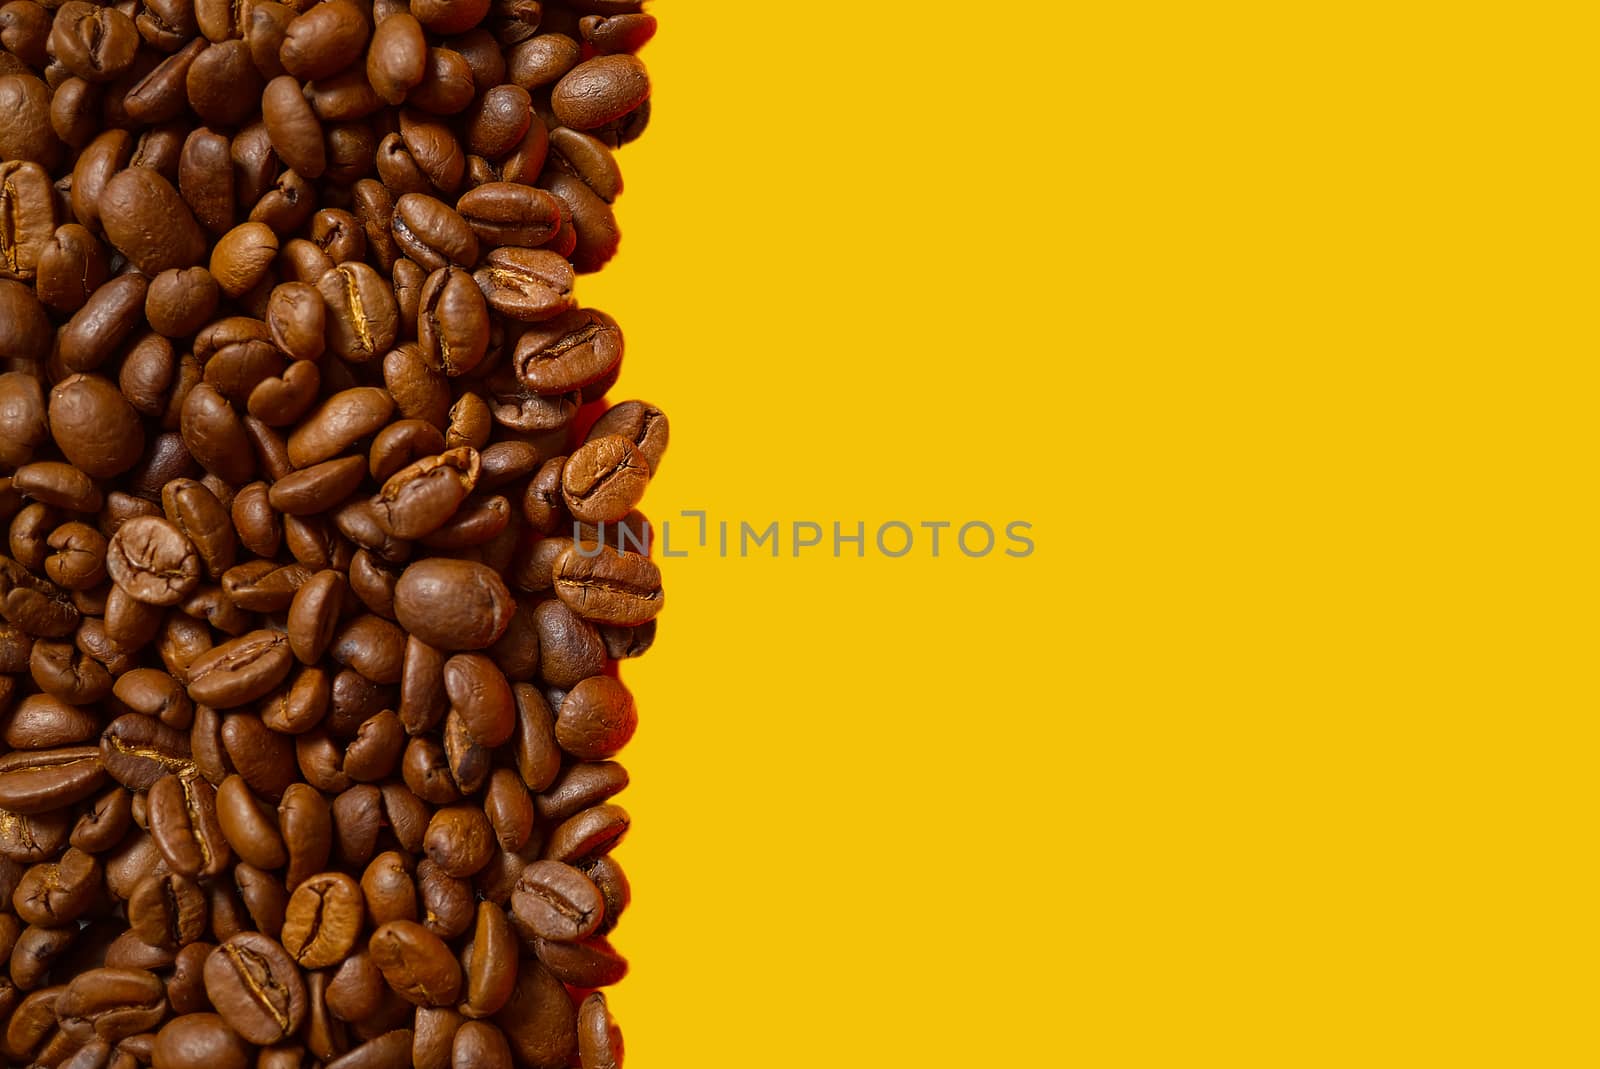 Texture of coffee beans. Roasted coffee beans background. close up Coffee beans with copy space on orange background by PhotoTime